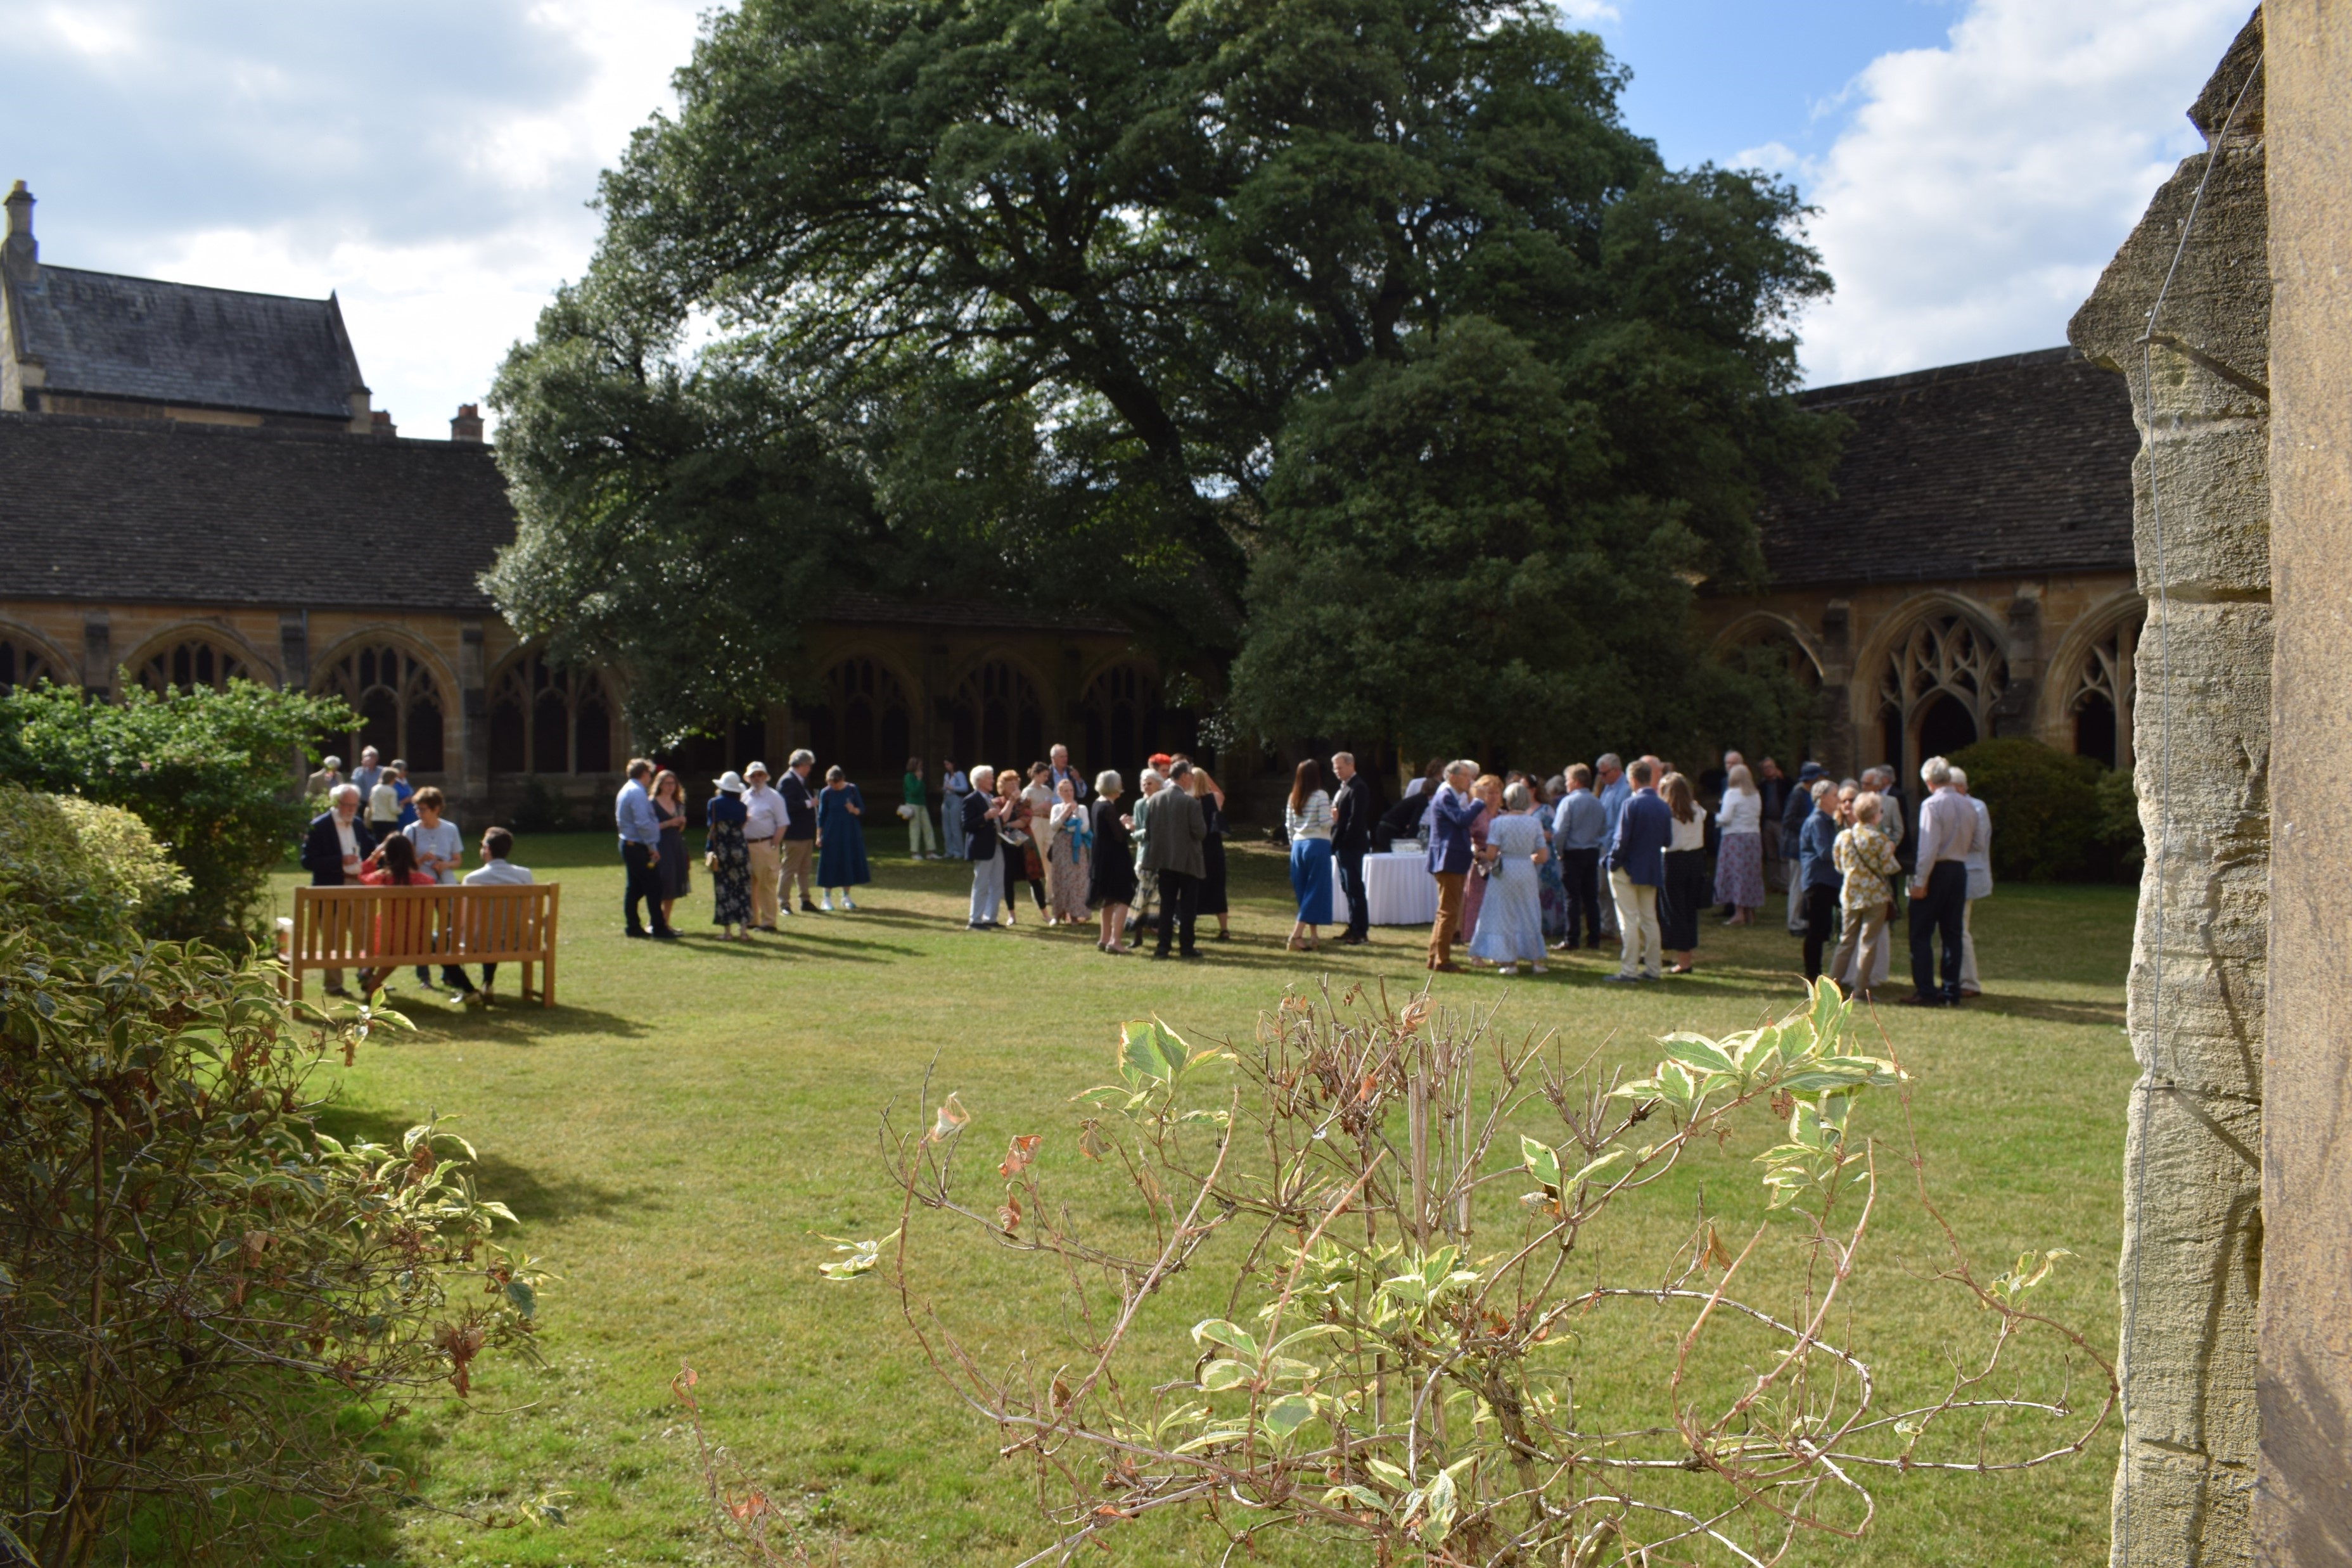 Large group of people on central lawn of some medieval cloisters, with a large oak tree behind